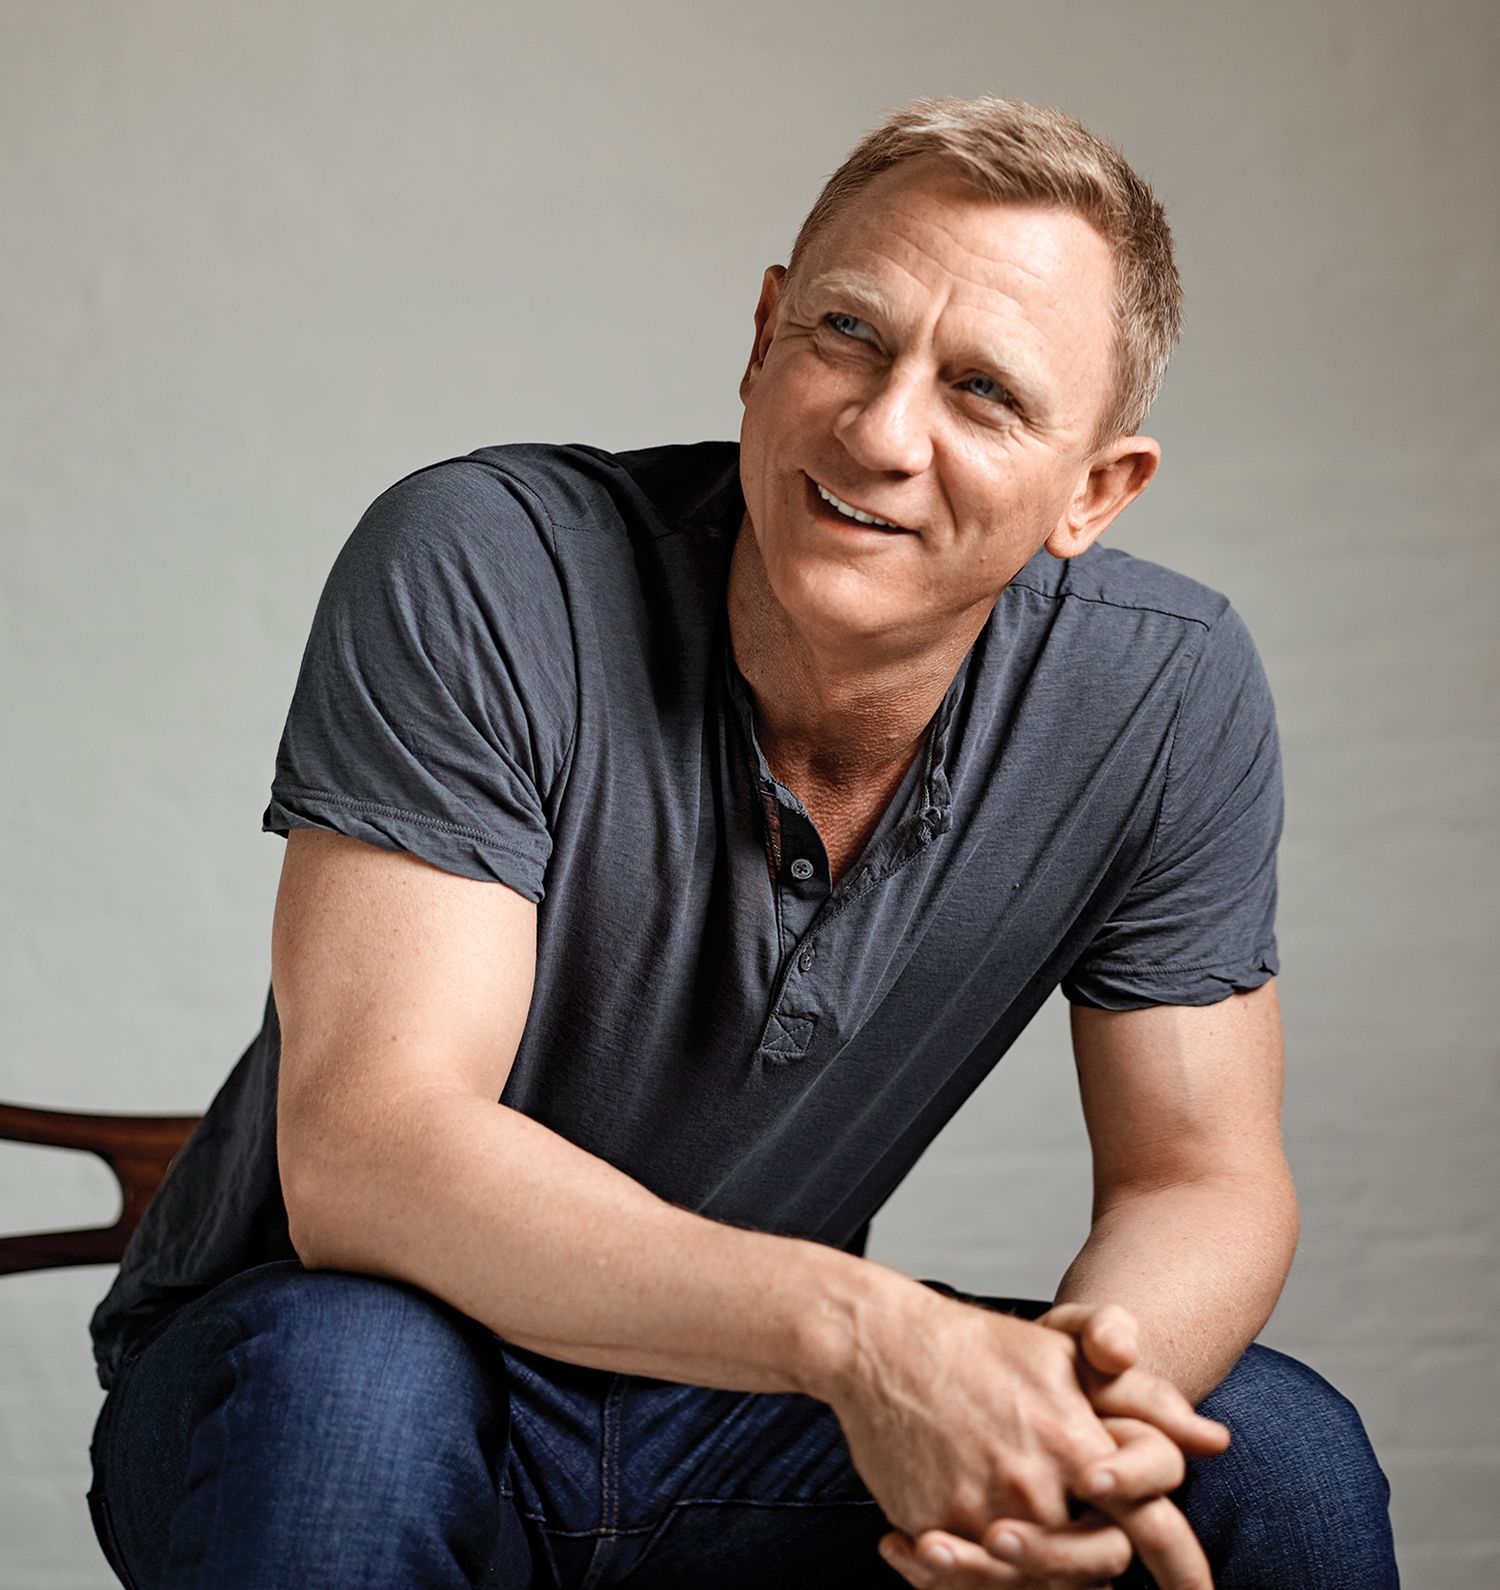 Here’s What Made Daniel Craig Do Next James Bond Movie...And No It Wasn't Money